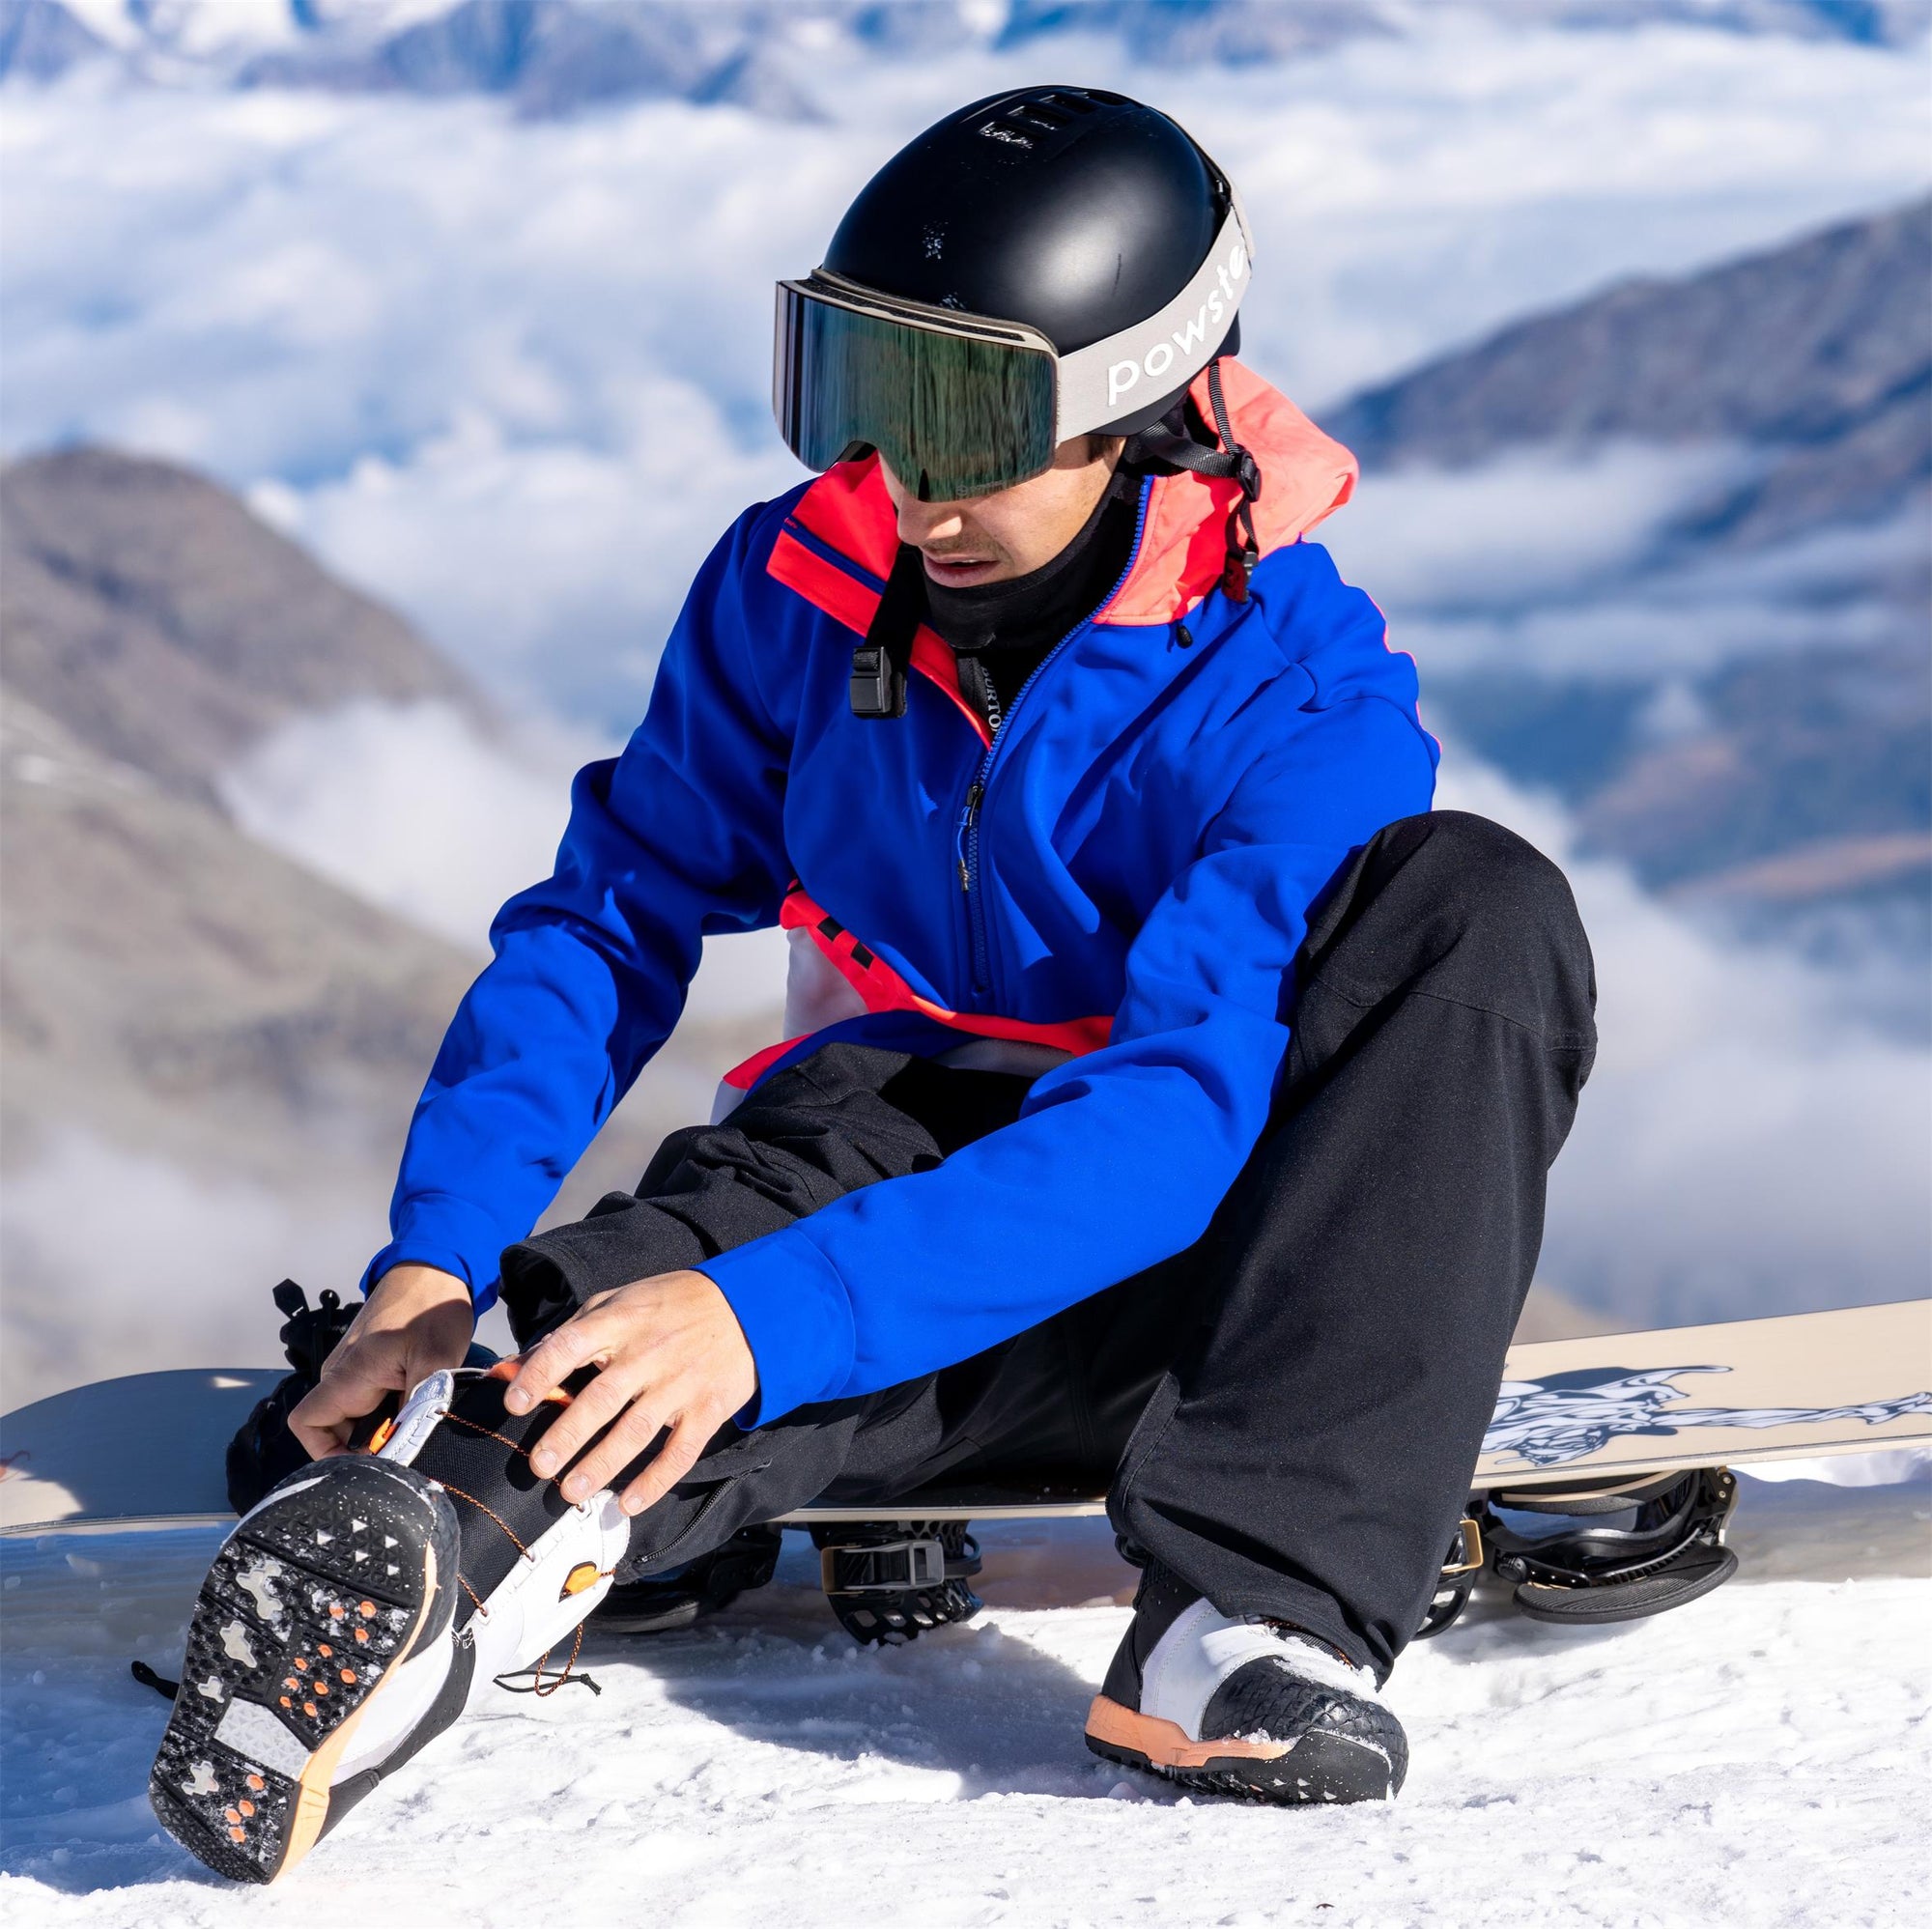 Off Season Ski Blues? Great tips on what to do when away from the slopes!